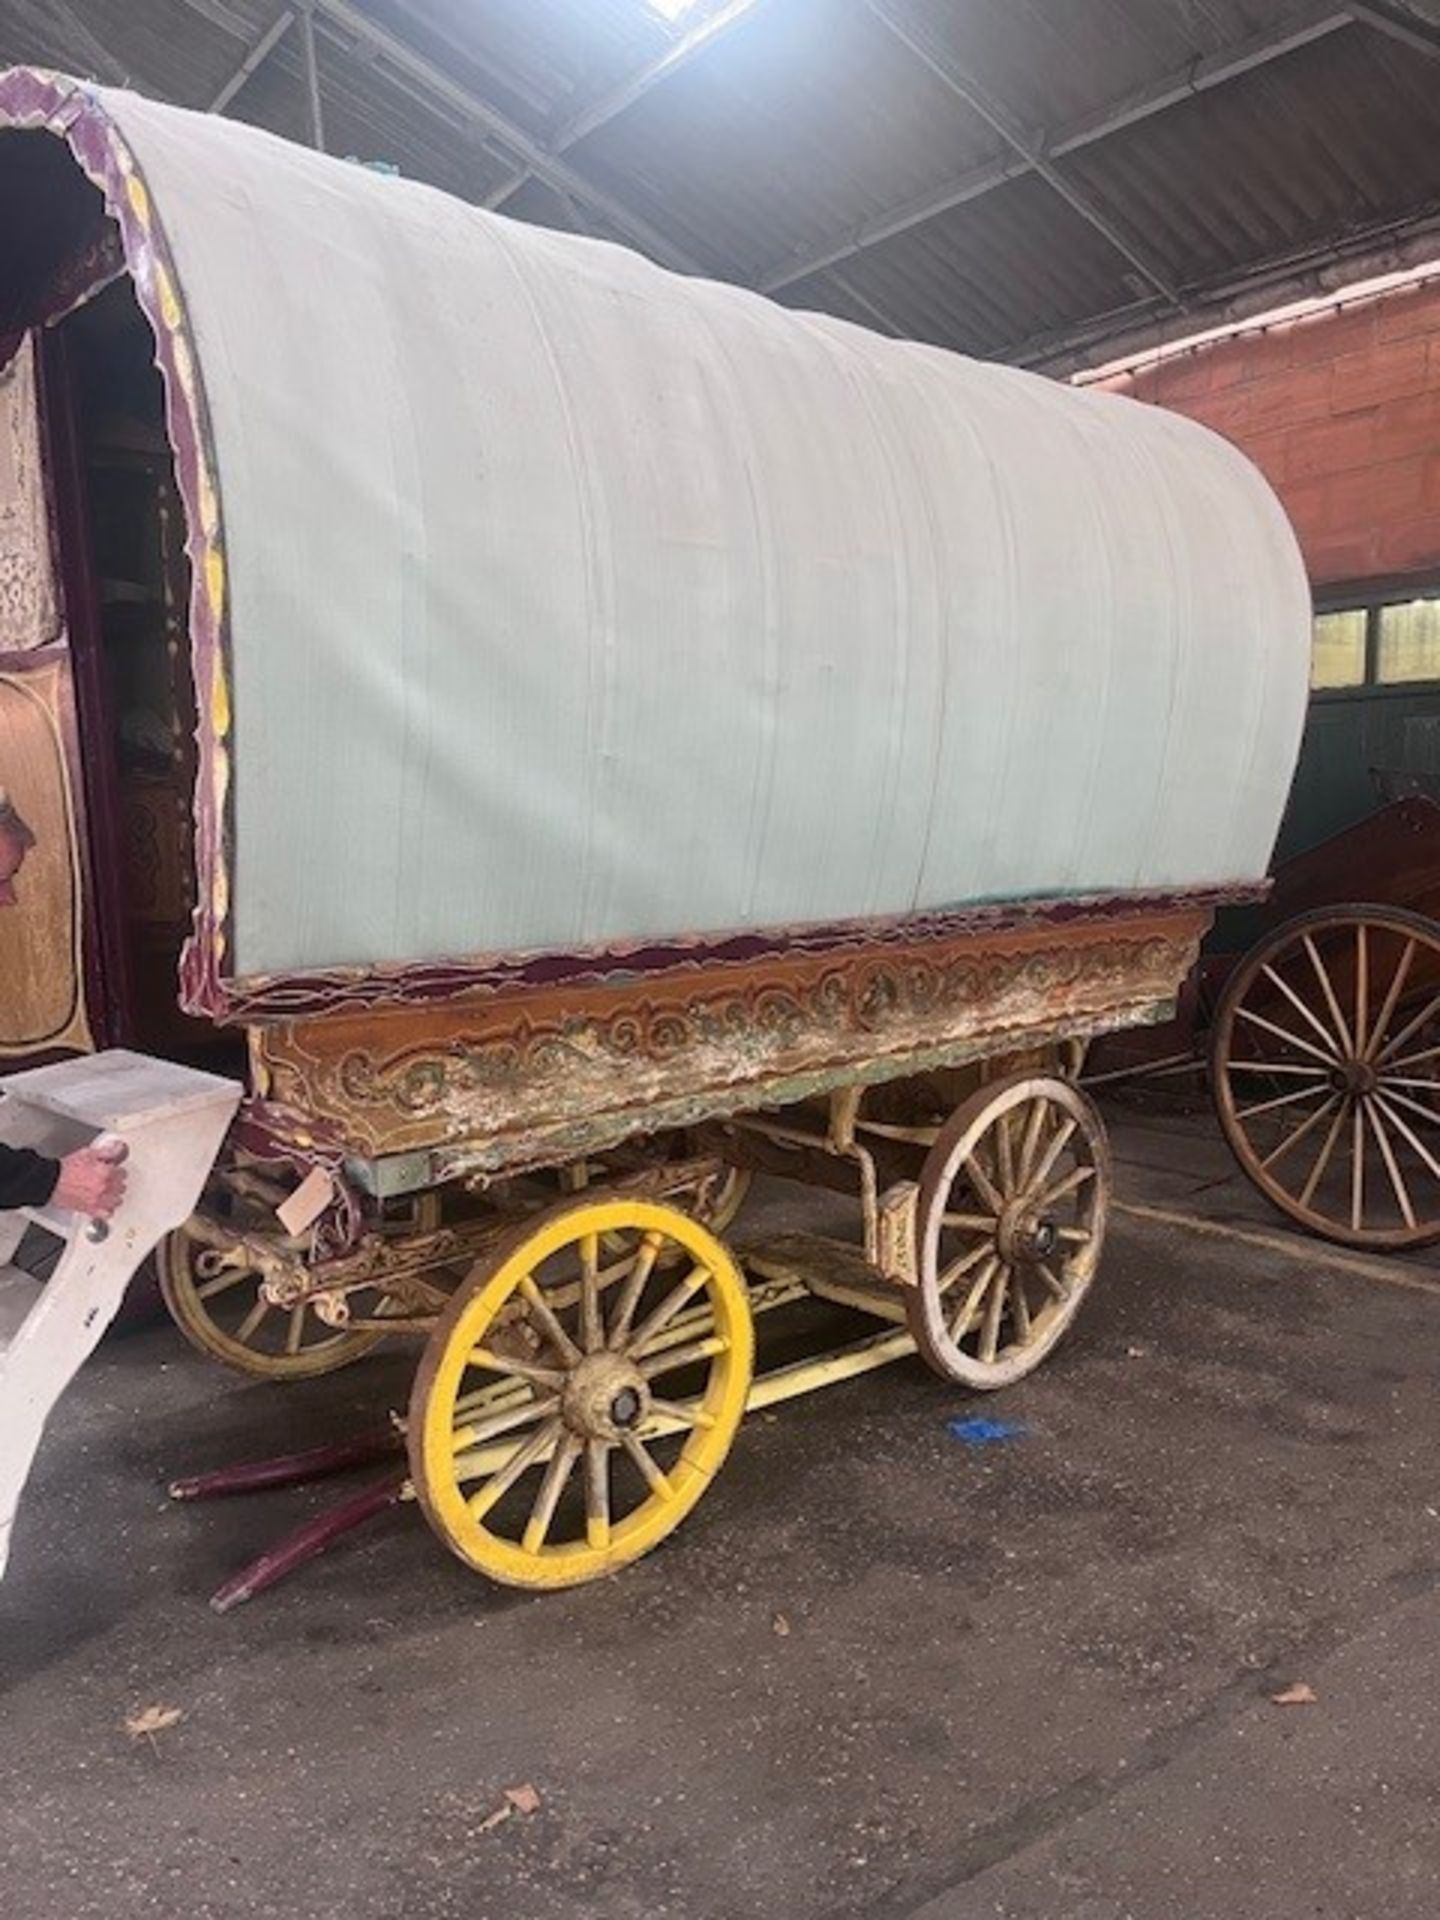 BOW TOP WAGON the dray axles understood to be dated 1904. The exterior has a varnished gold coloured